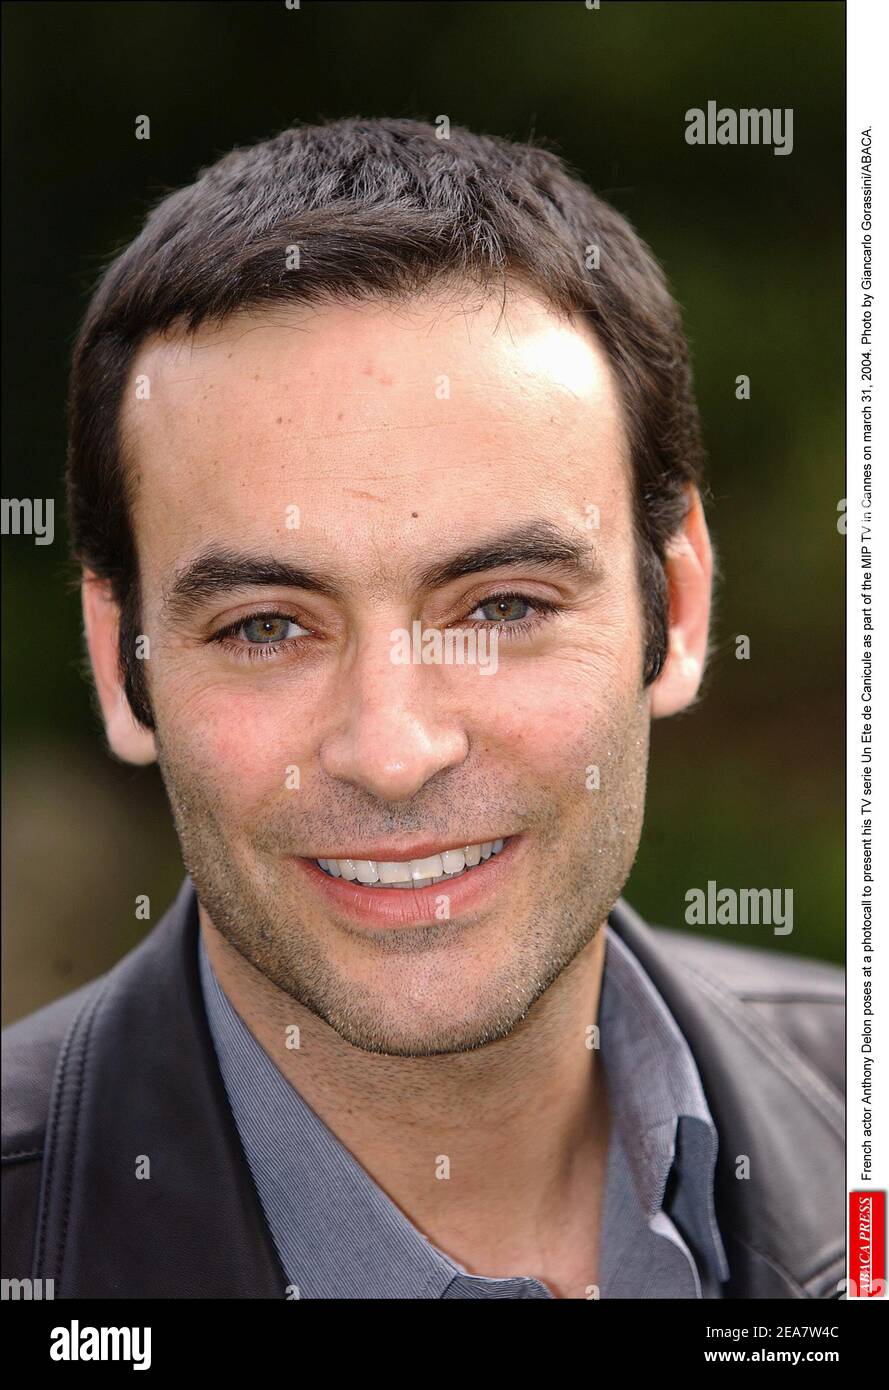 French actor Anthony Delon poses at a photocall to present his TV serie Un Ete de Canicule as part of the MIP TV in Cannes on march 31, 2004. Photo by Giancarlo Gorassini/ABACA. Stock Photo